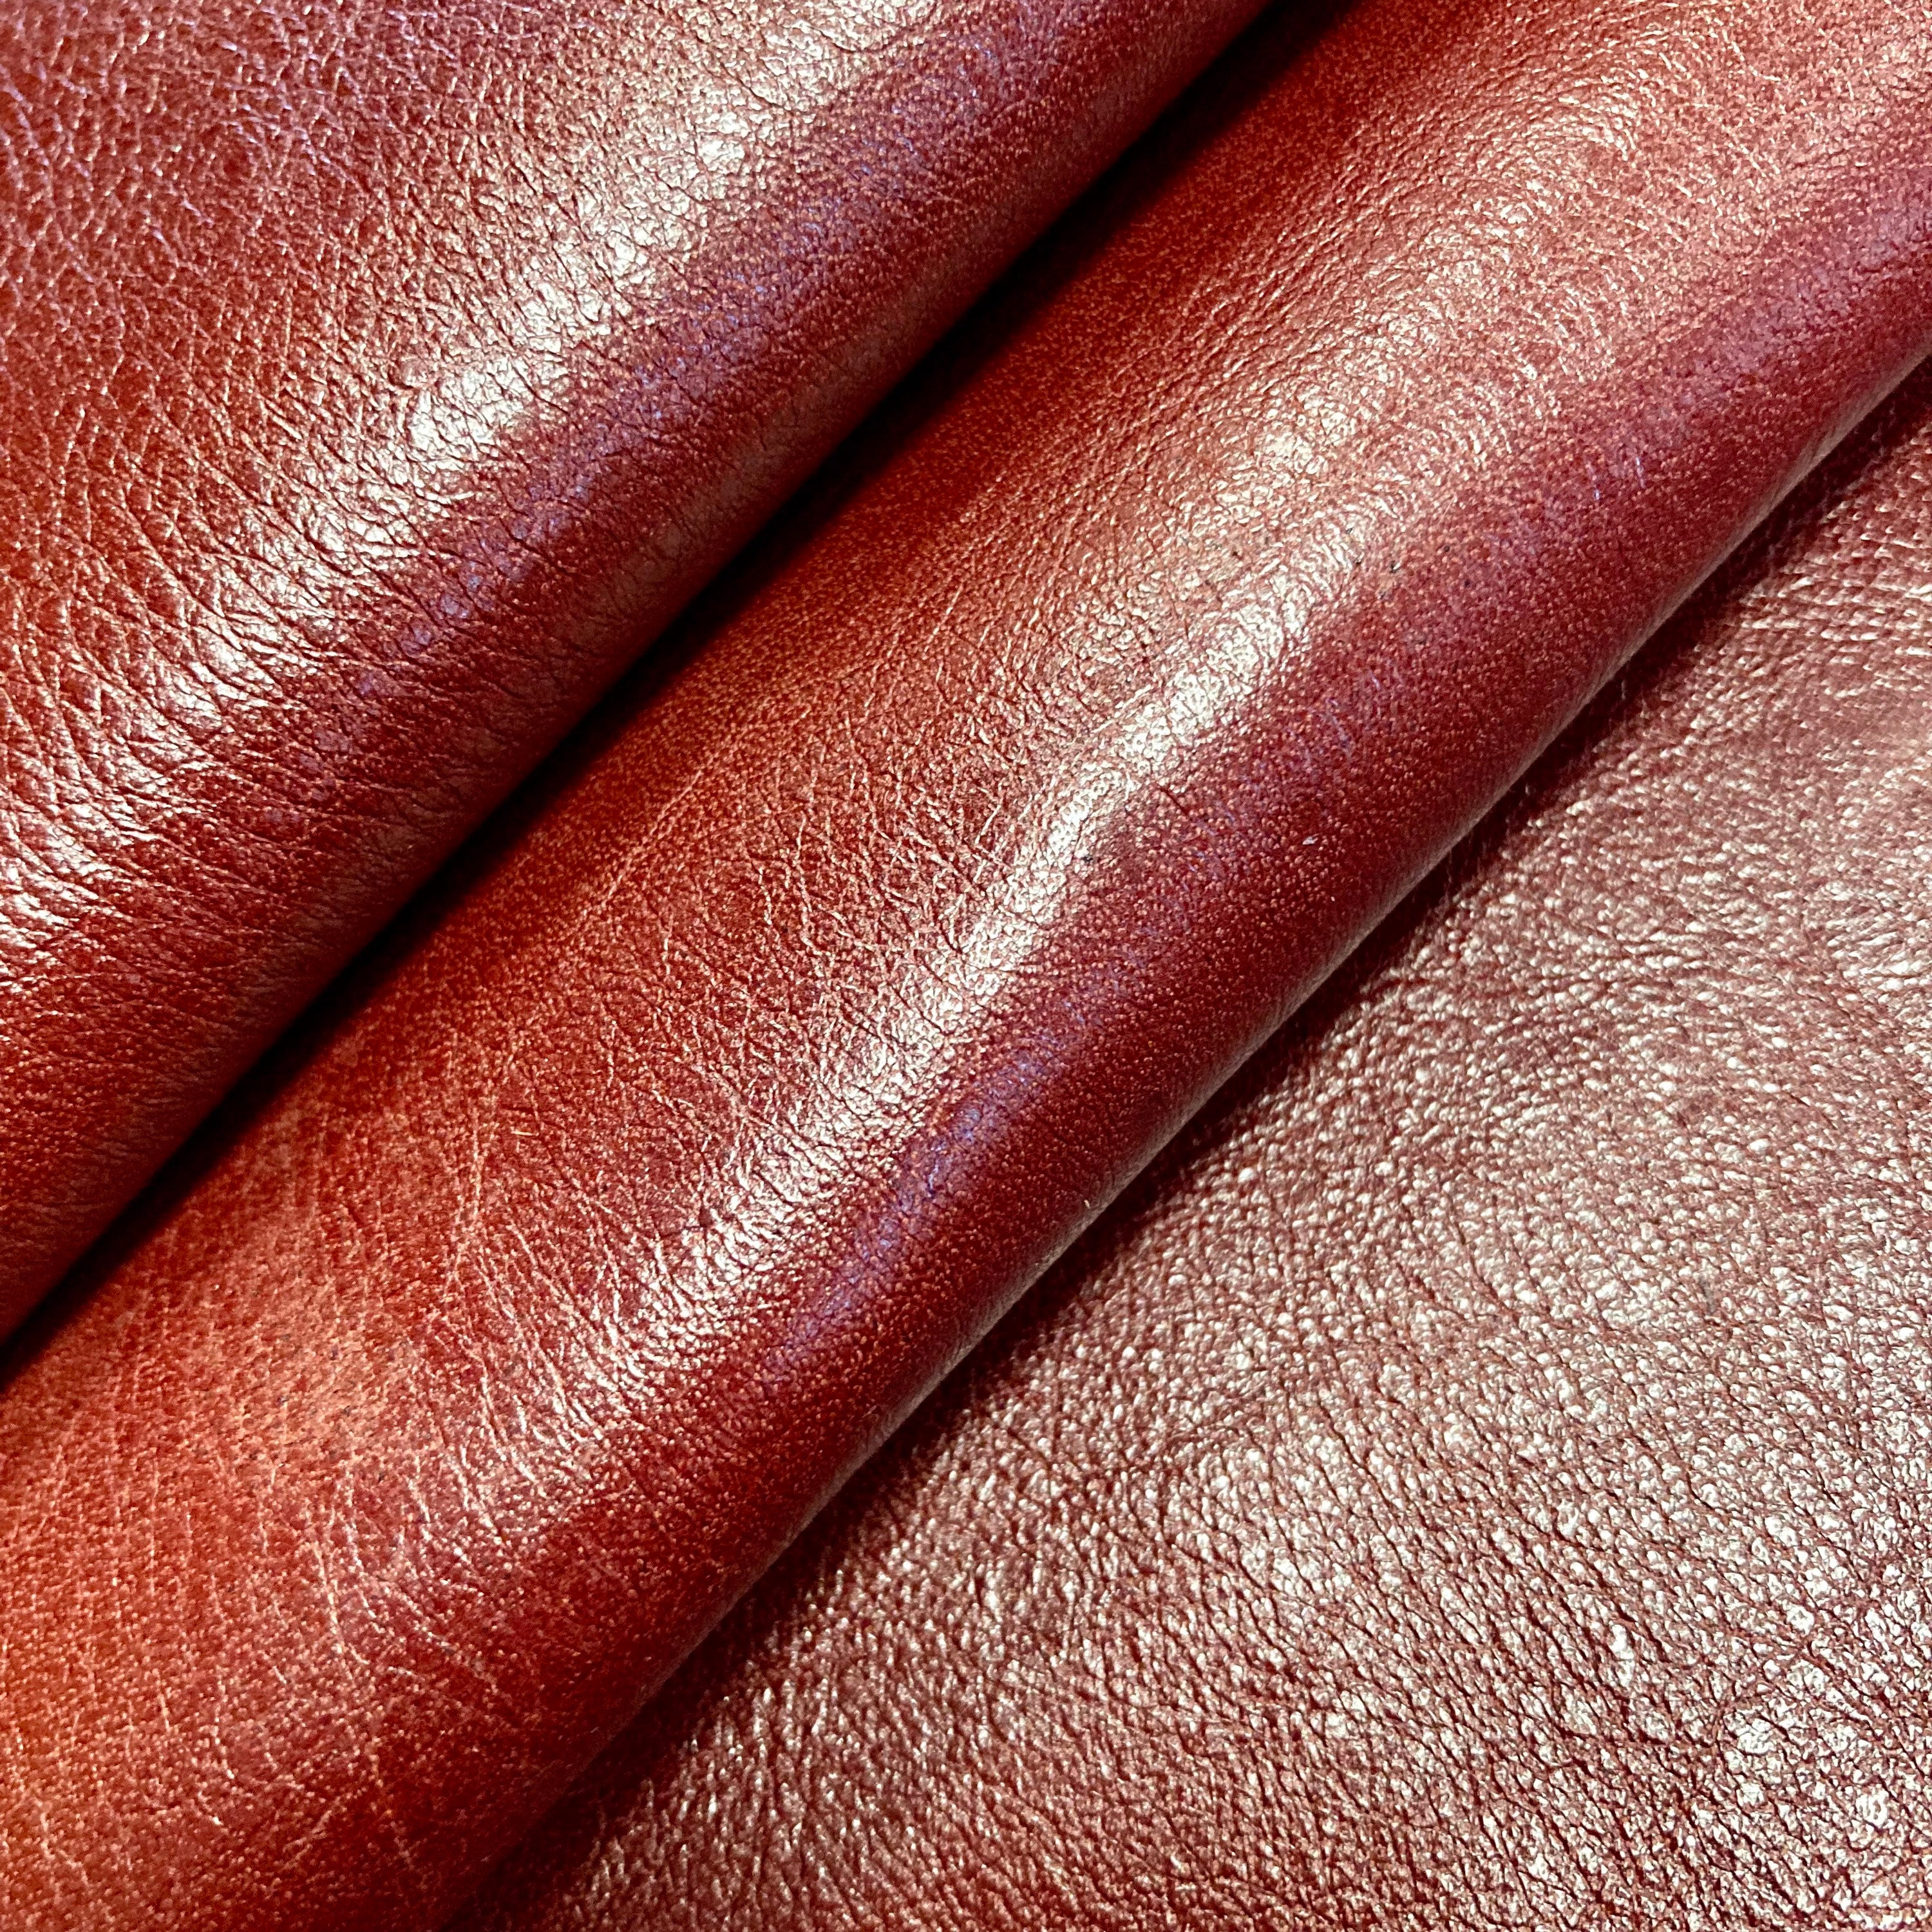 ITALIAN RED BROWN Color Leather for Crafting and Diy Genuine Leather  Natural Leather Full Grain Leather 